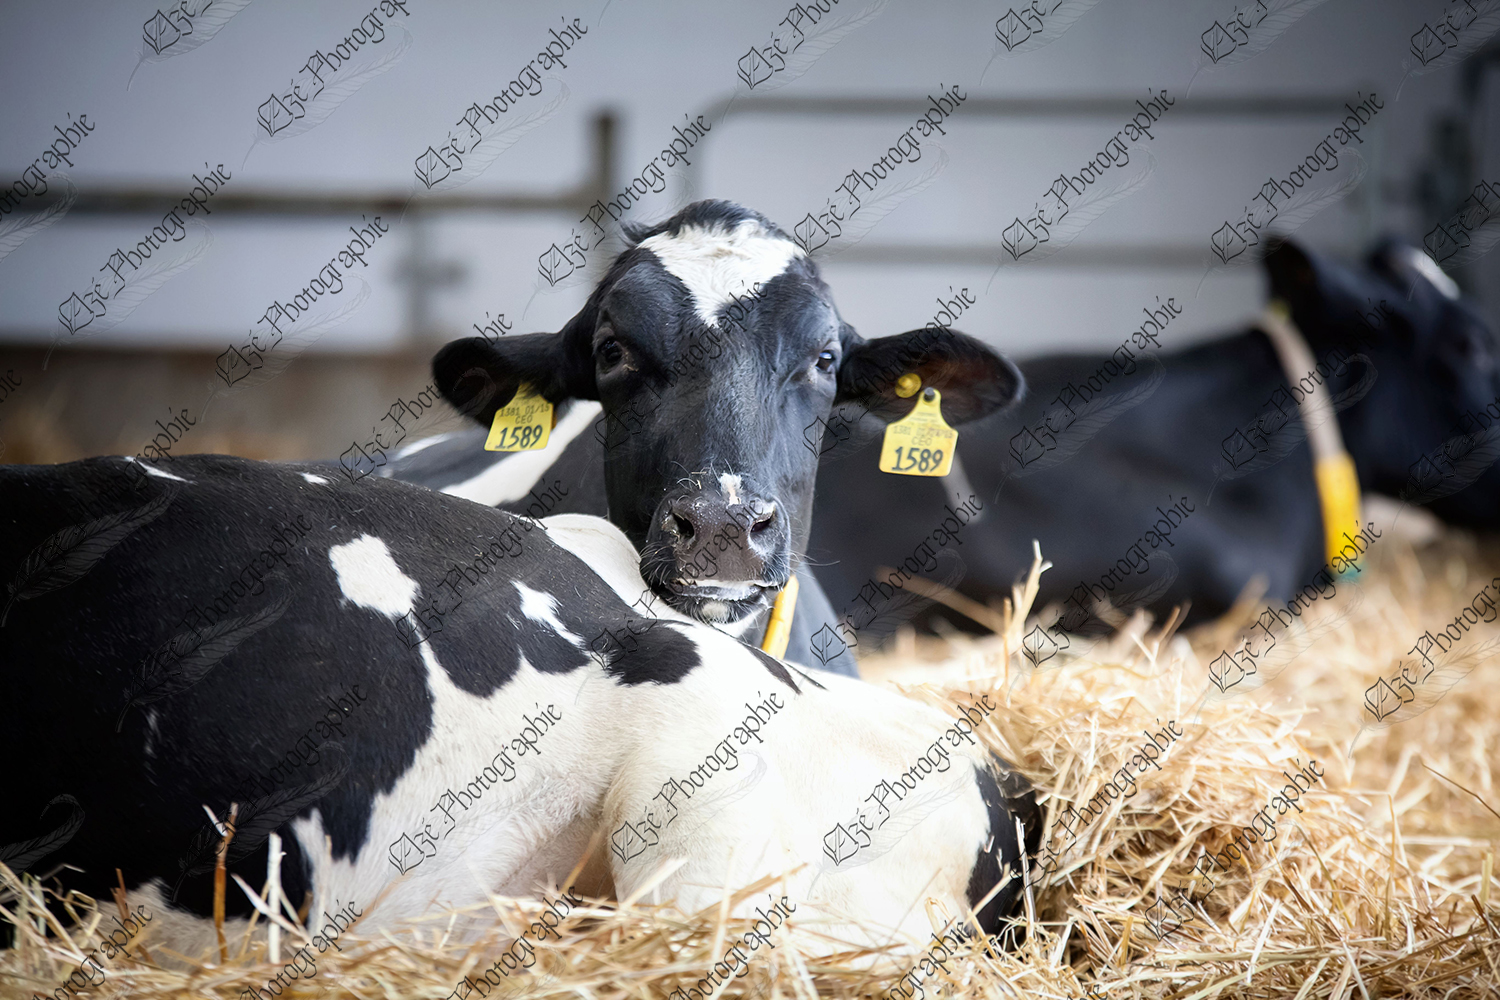 elze_photo_6091_repos_vaches_couchees_cows_lying_straw